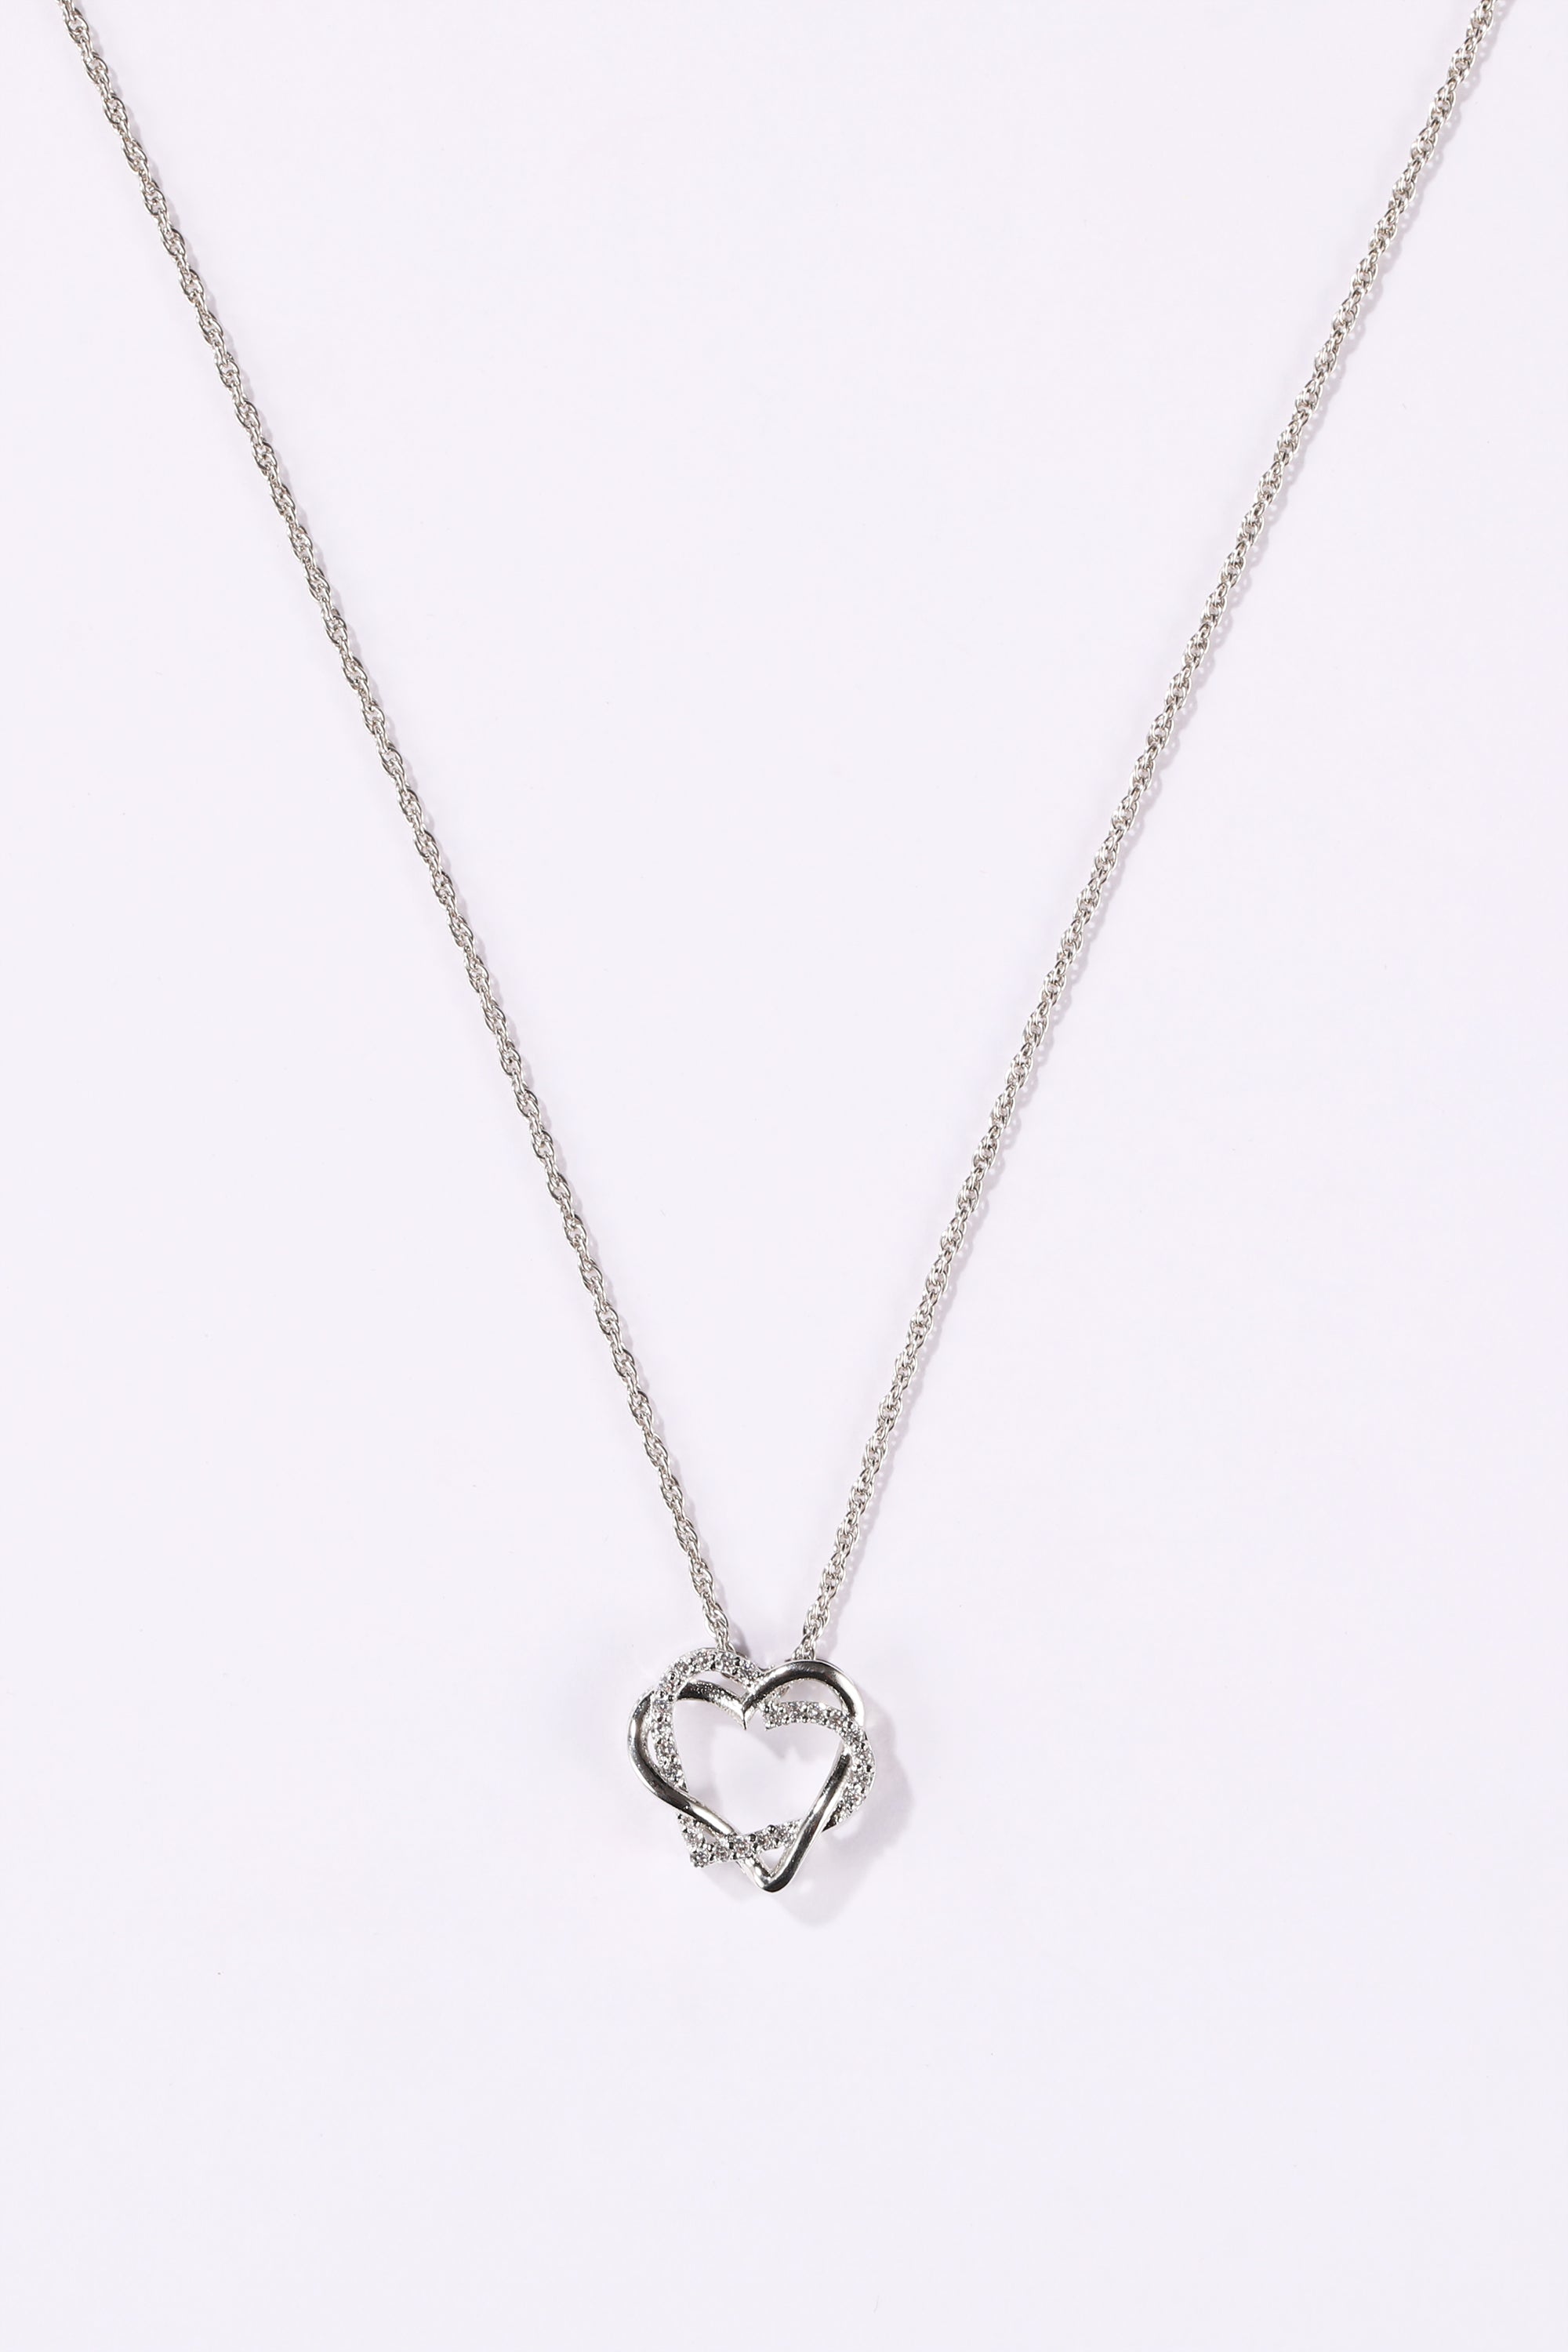 Bound by Love Pendant